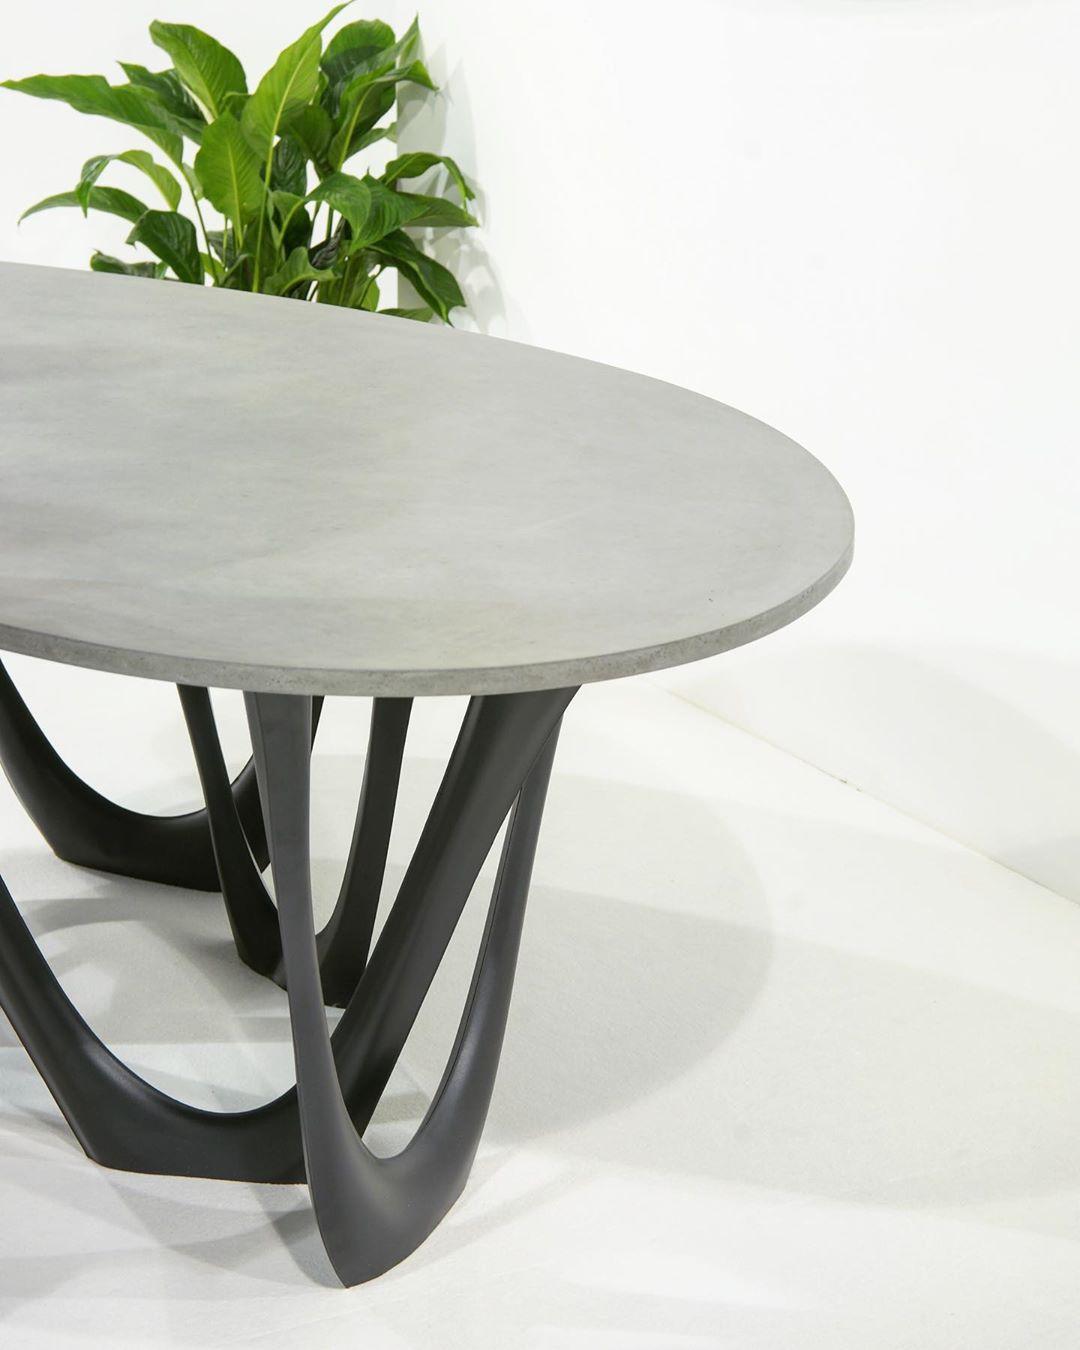 G-table B and C, sculptural table in coated steel, Zieta
Dimensions: 
H 29.53 in. x W 78.75 in. x D 39.38 in.
H 75 cm x W 200 cm x D 110 cm
Material: Coated steel and concrete top.

About G-Table: 

Zieta uses parametric design software to generate